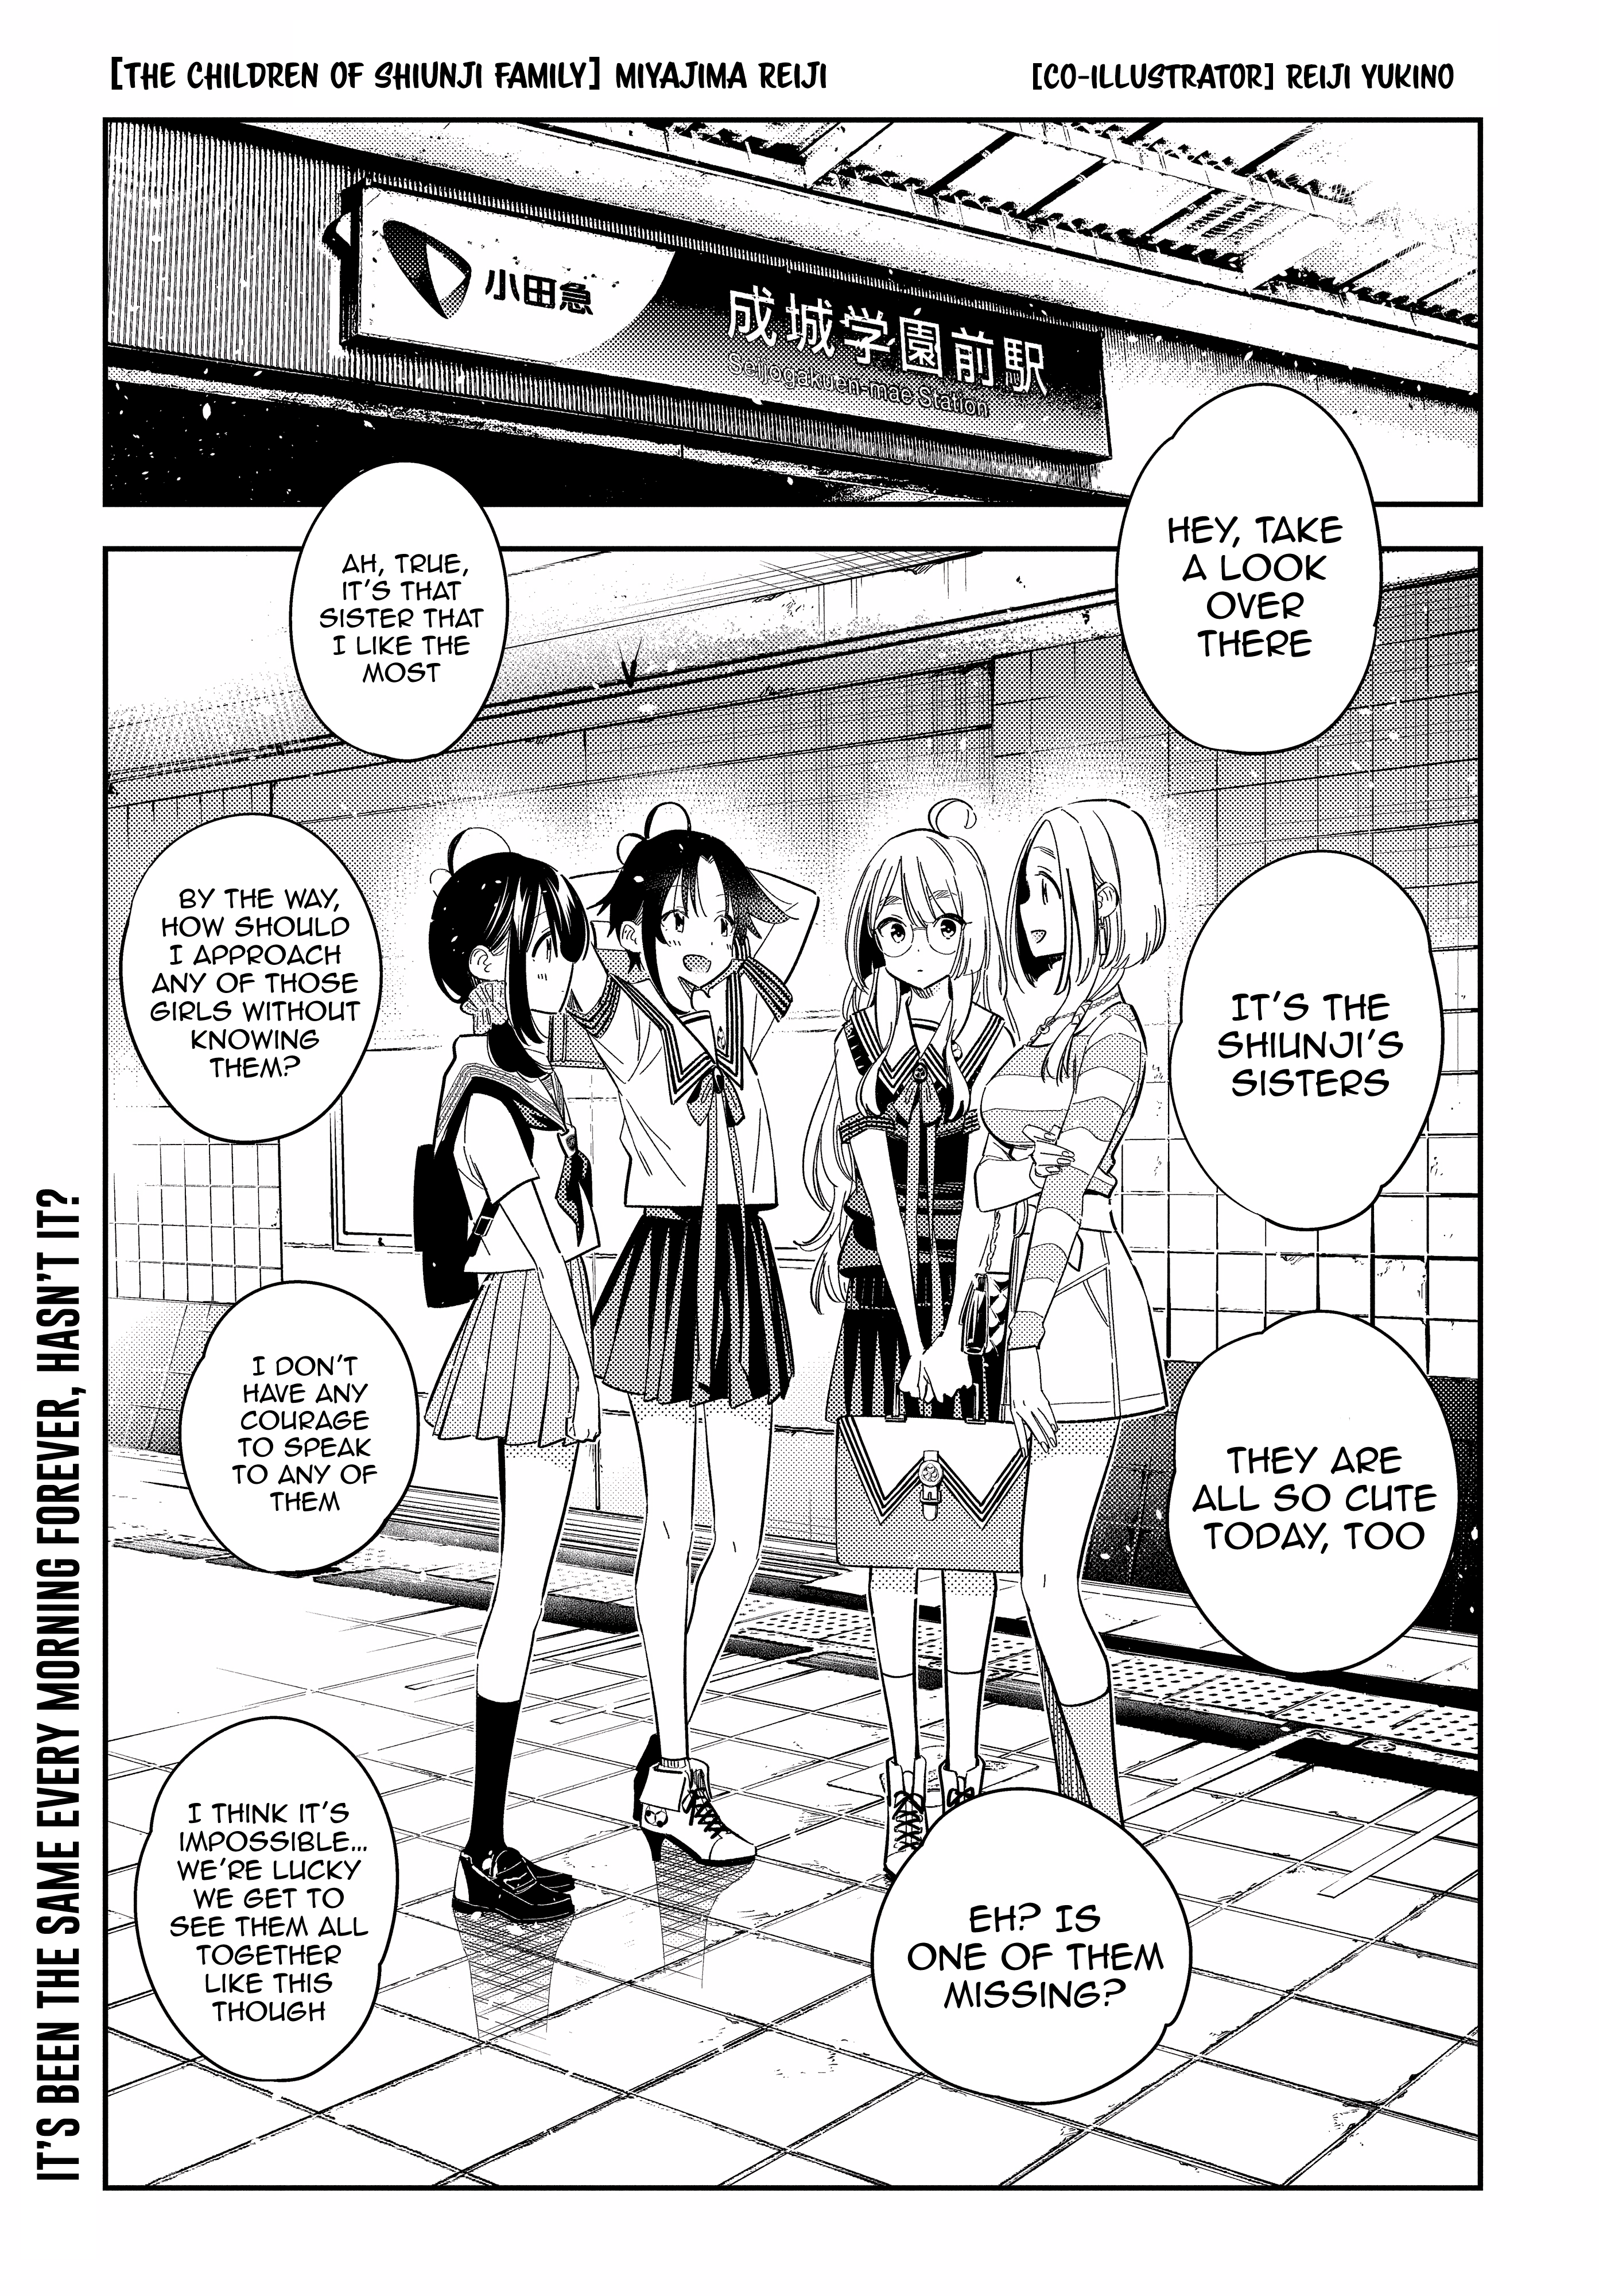 The Children Of Shiunji Family Vol.3 Chapter 22: The Twin's Disappearance - Picture 2